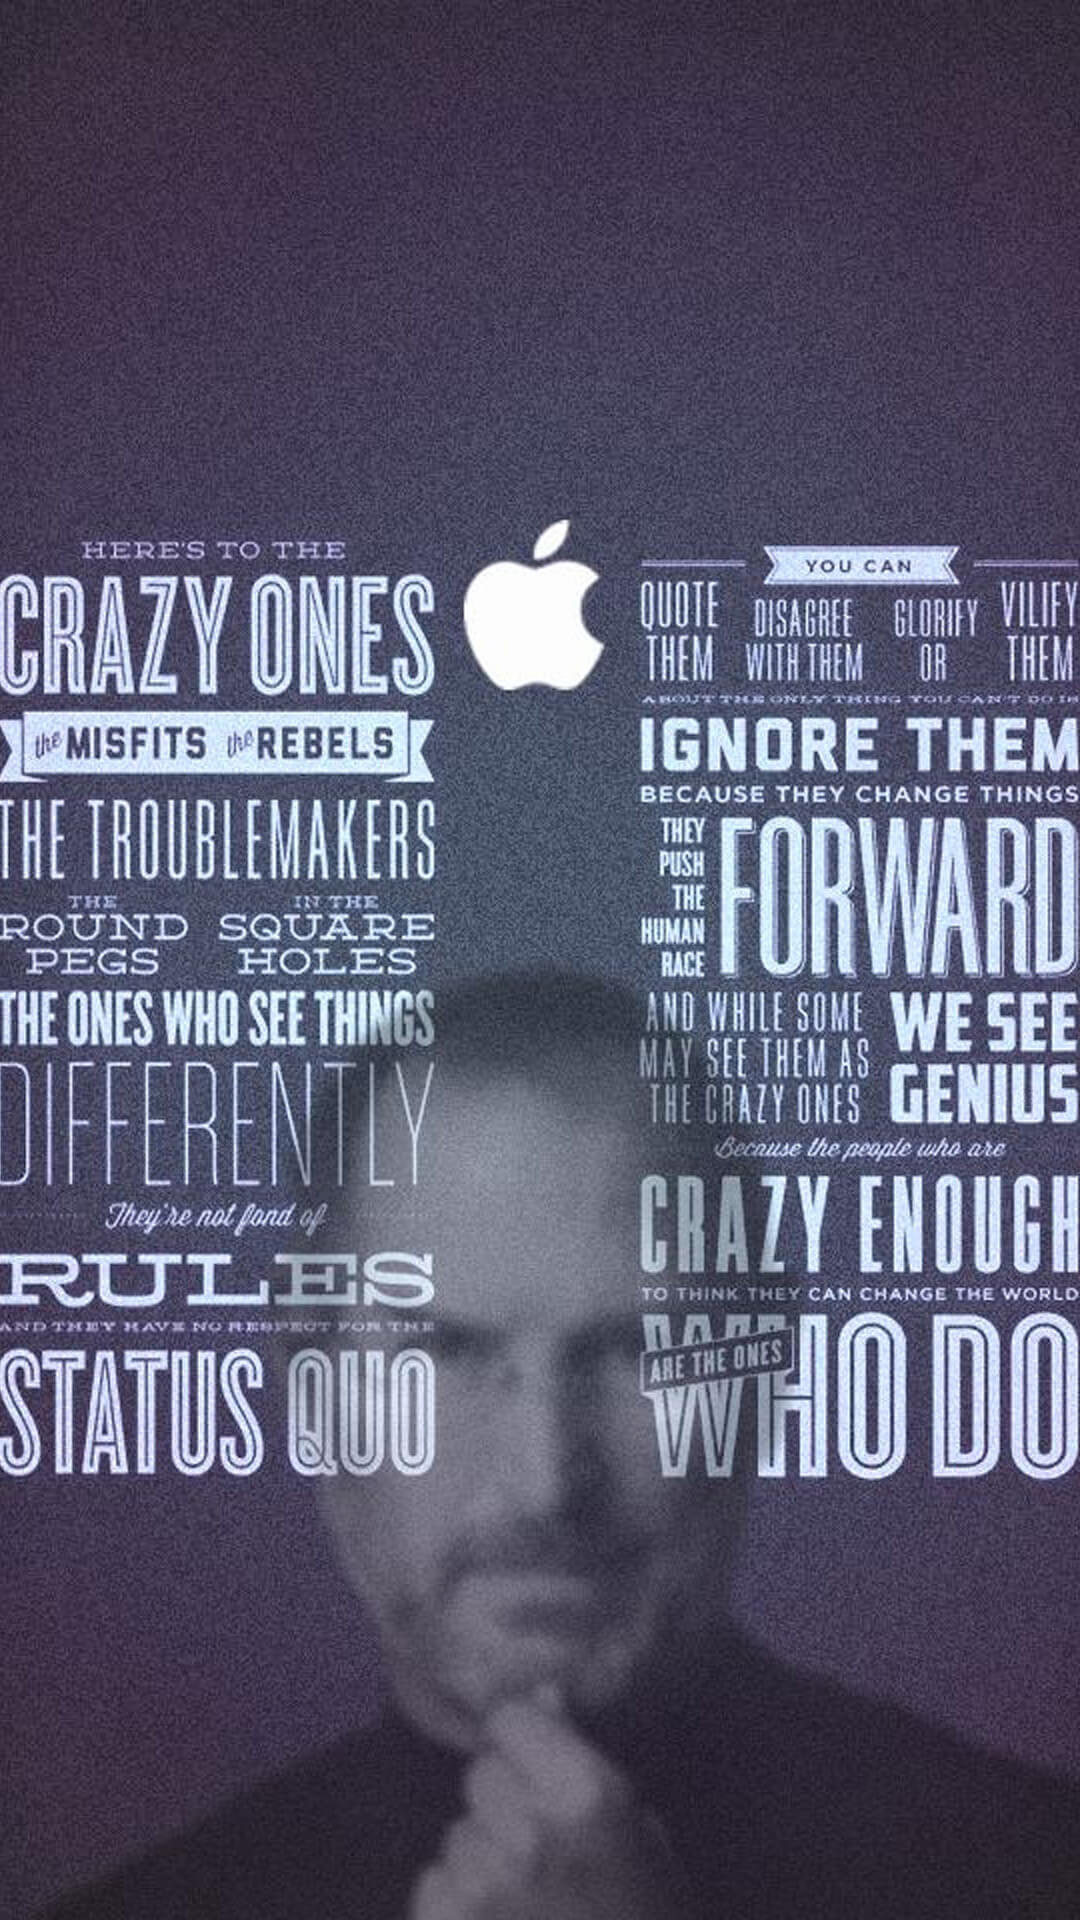 Steve Jobs Quotes Android wallpaper - Android HD wallpapers